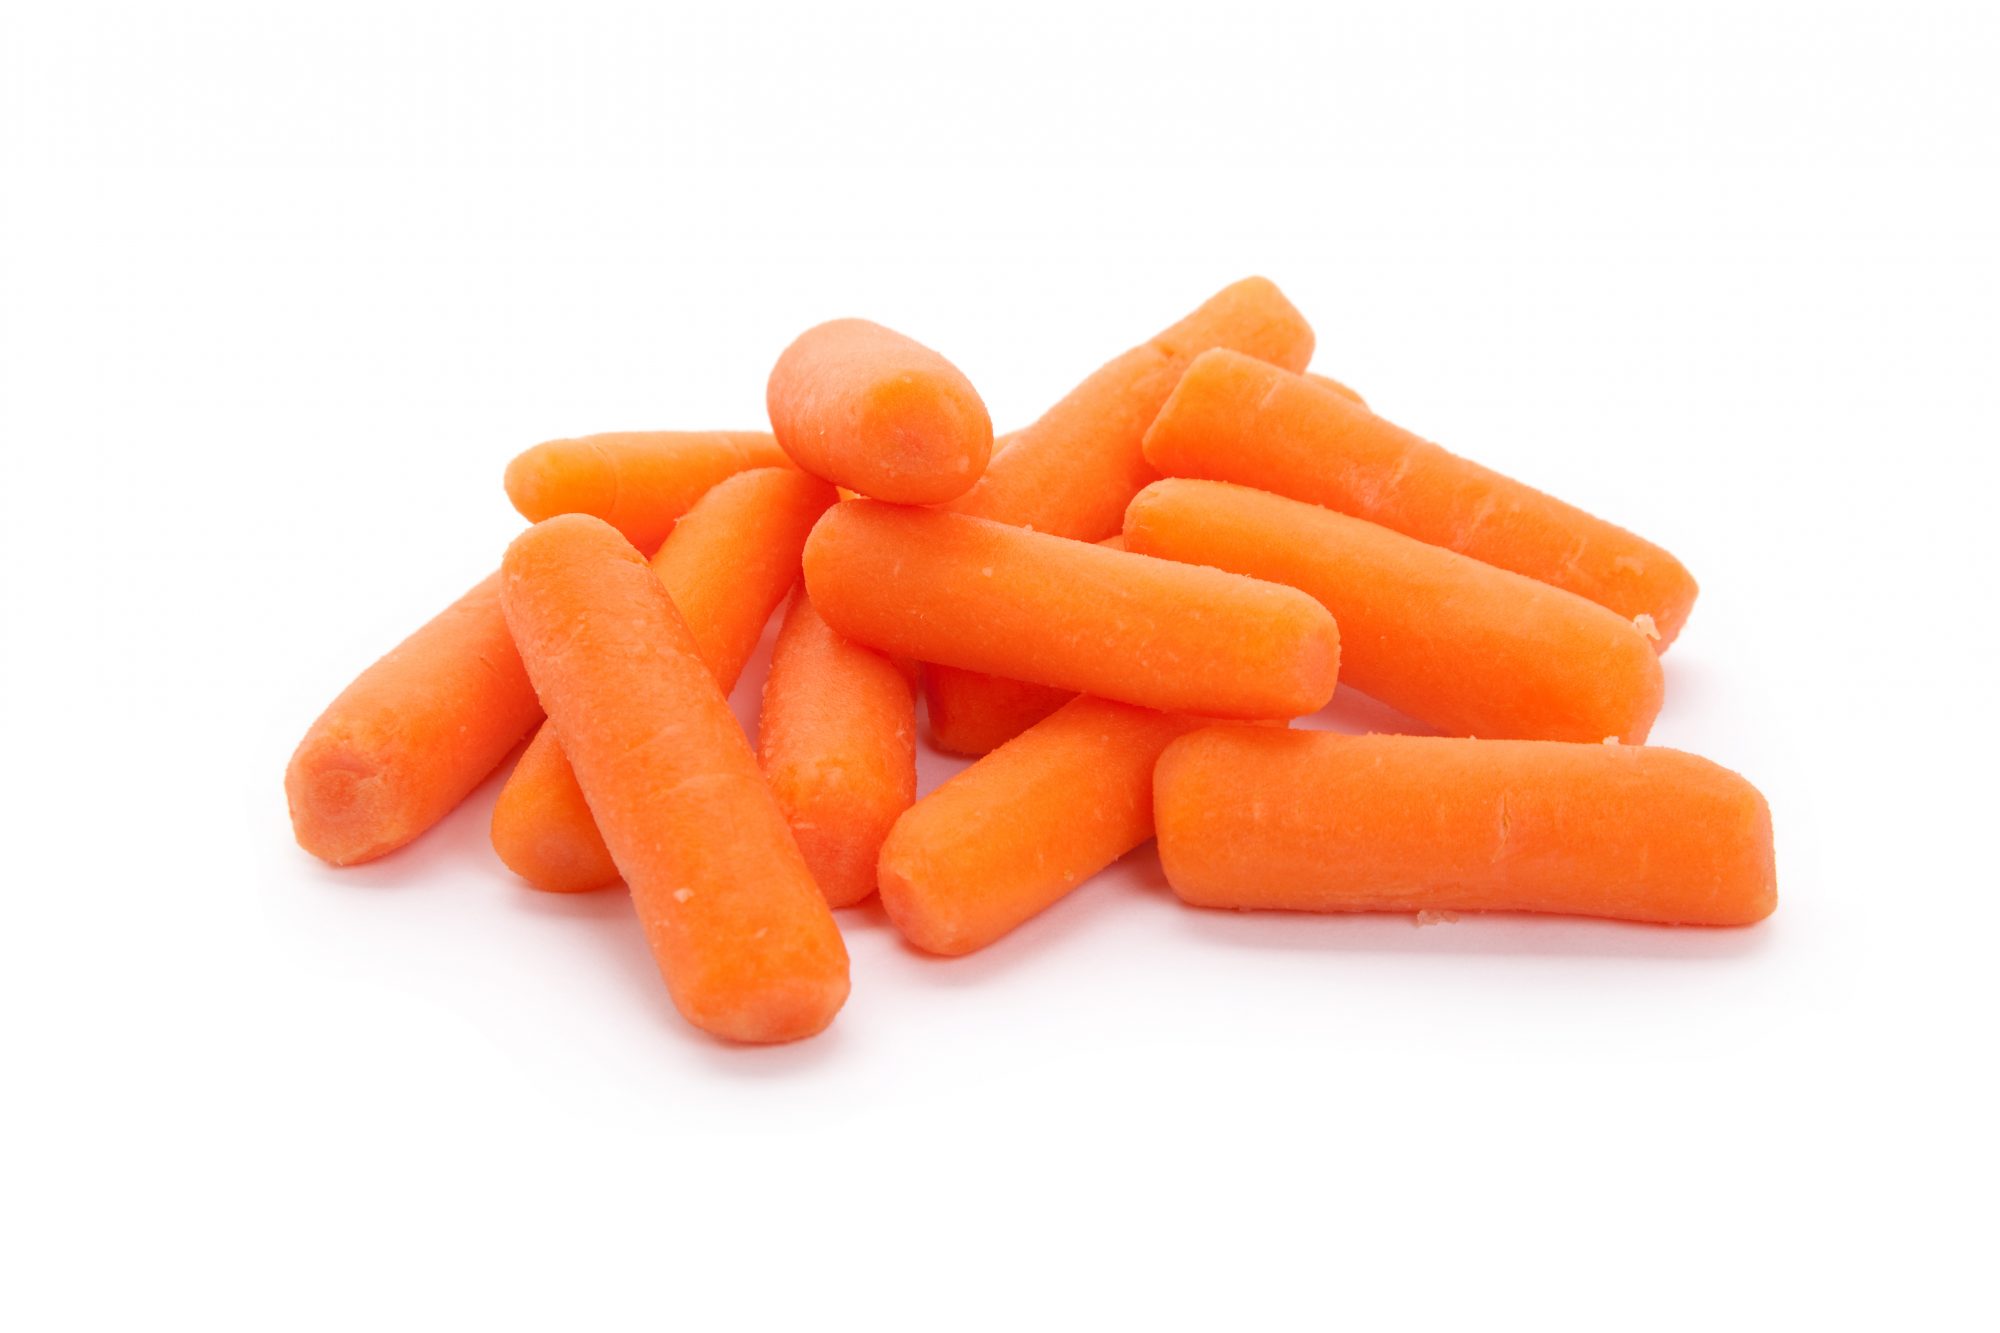 Carrot with white background